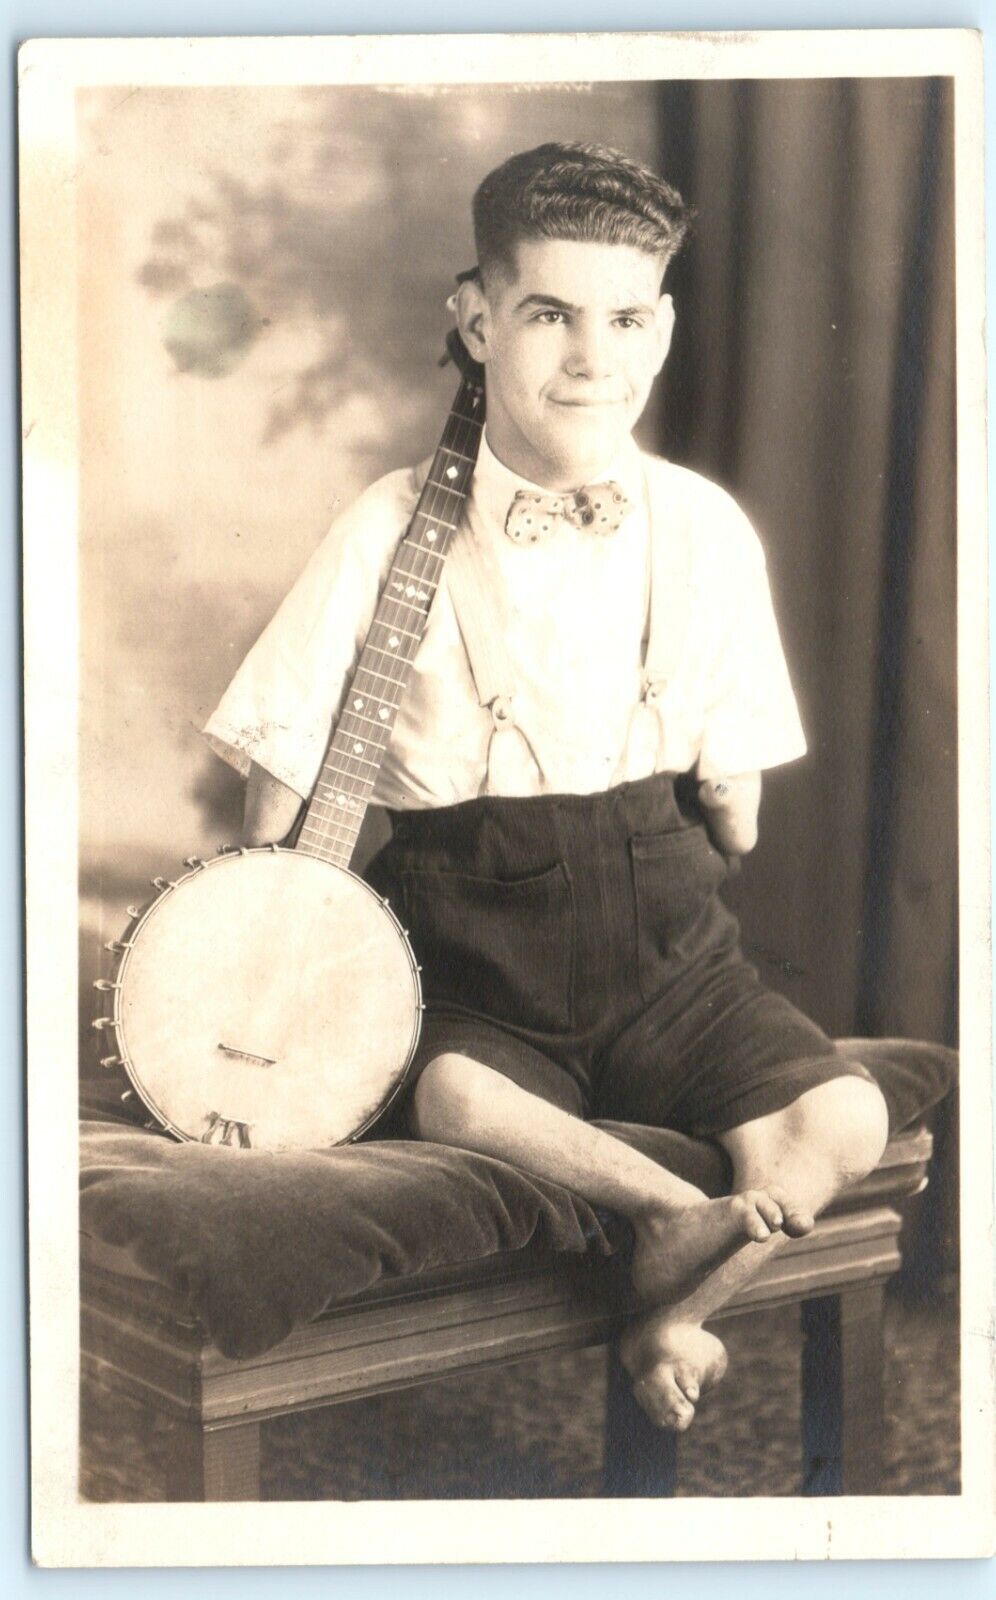 POSTCARD RPPC c1930s Man with Banjo Deformed Legs and Arms Studio Photo Johney